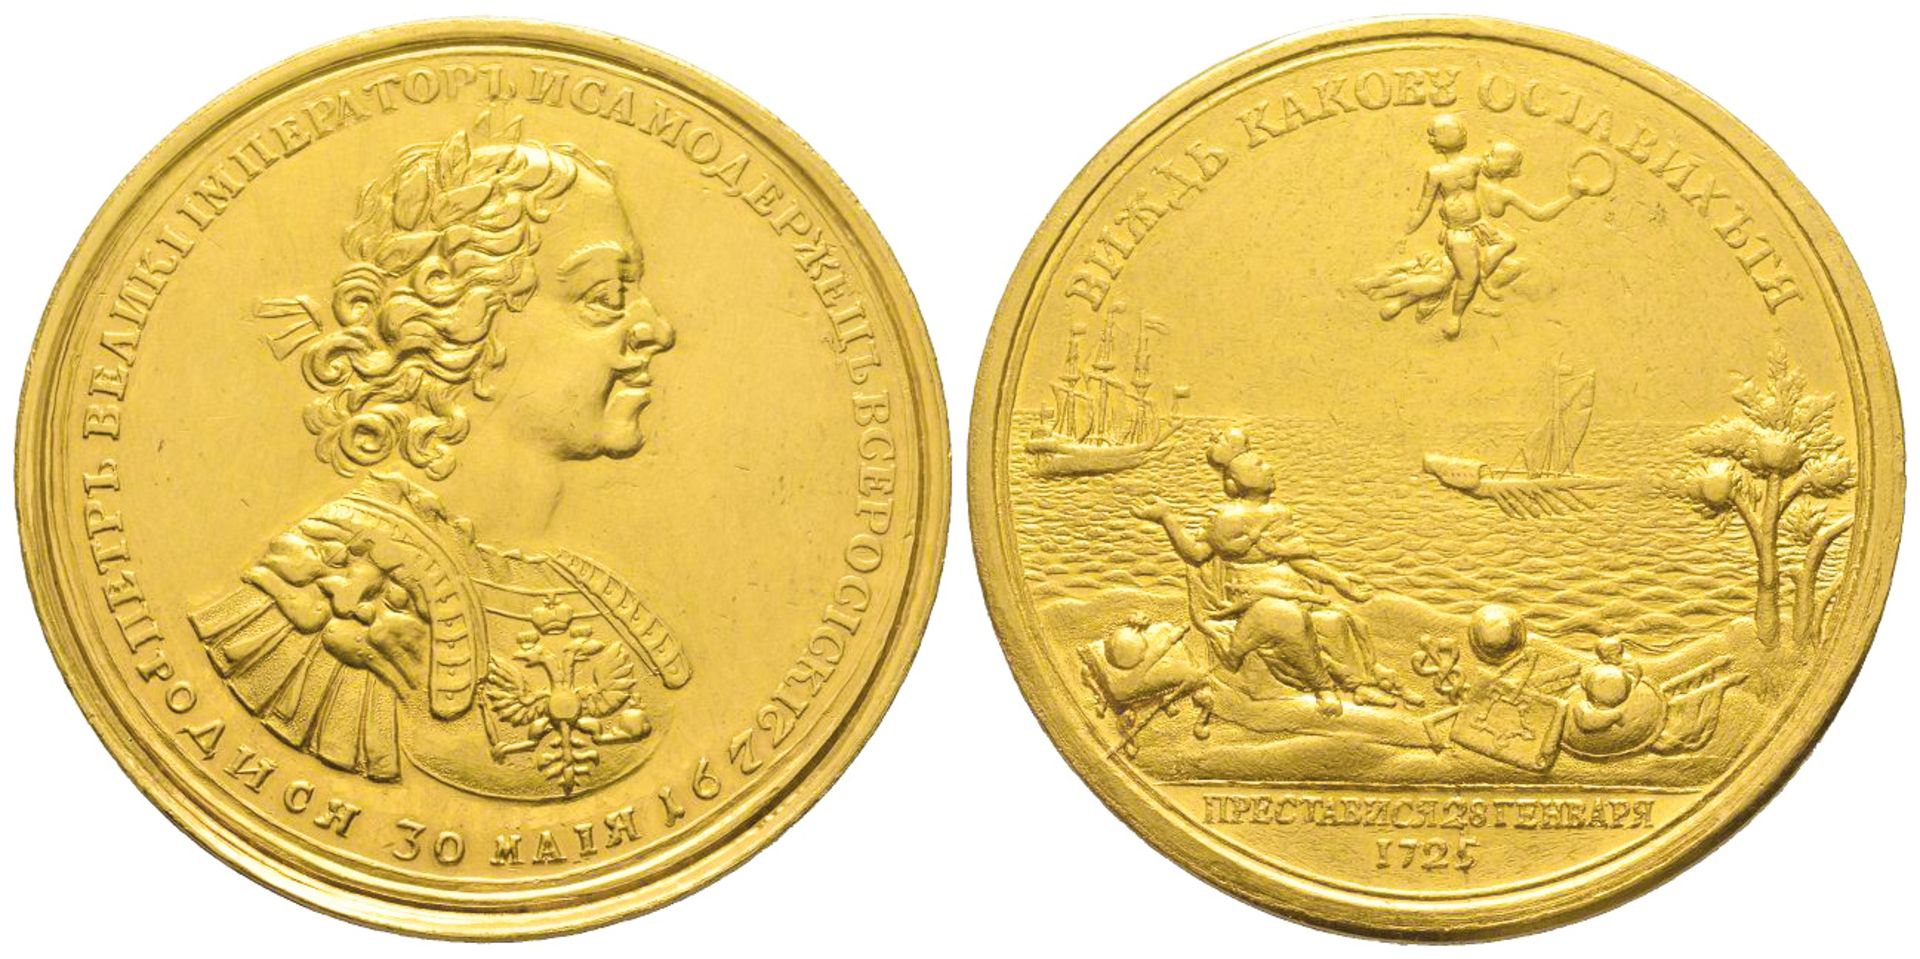 Peter the Great, 1682-1725 - Gold medal, 1725, by Cupy, commemorating his death, AU [...]